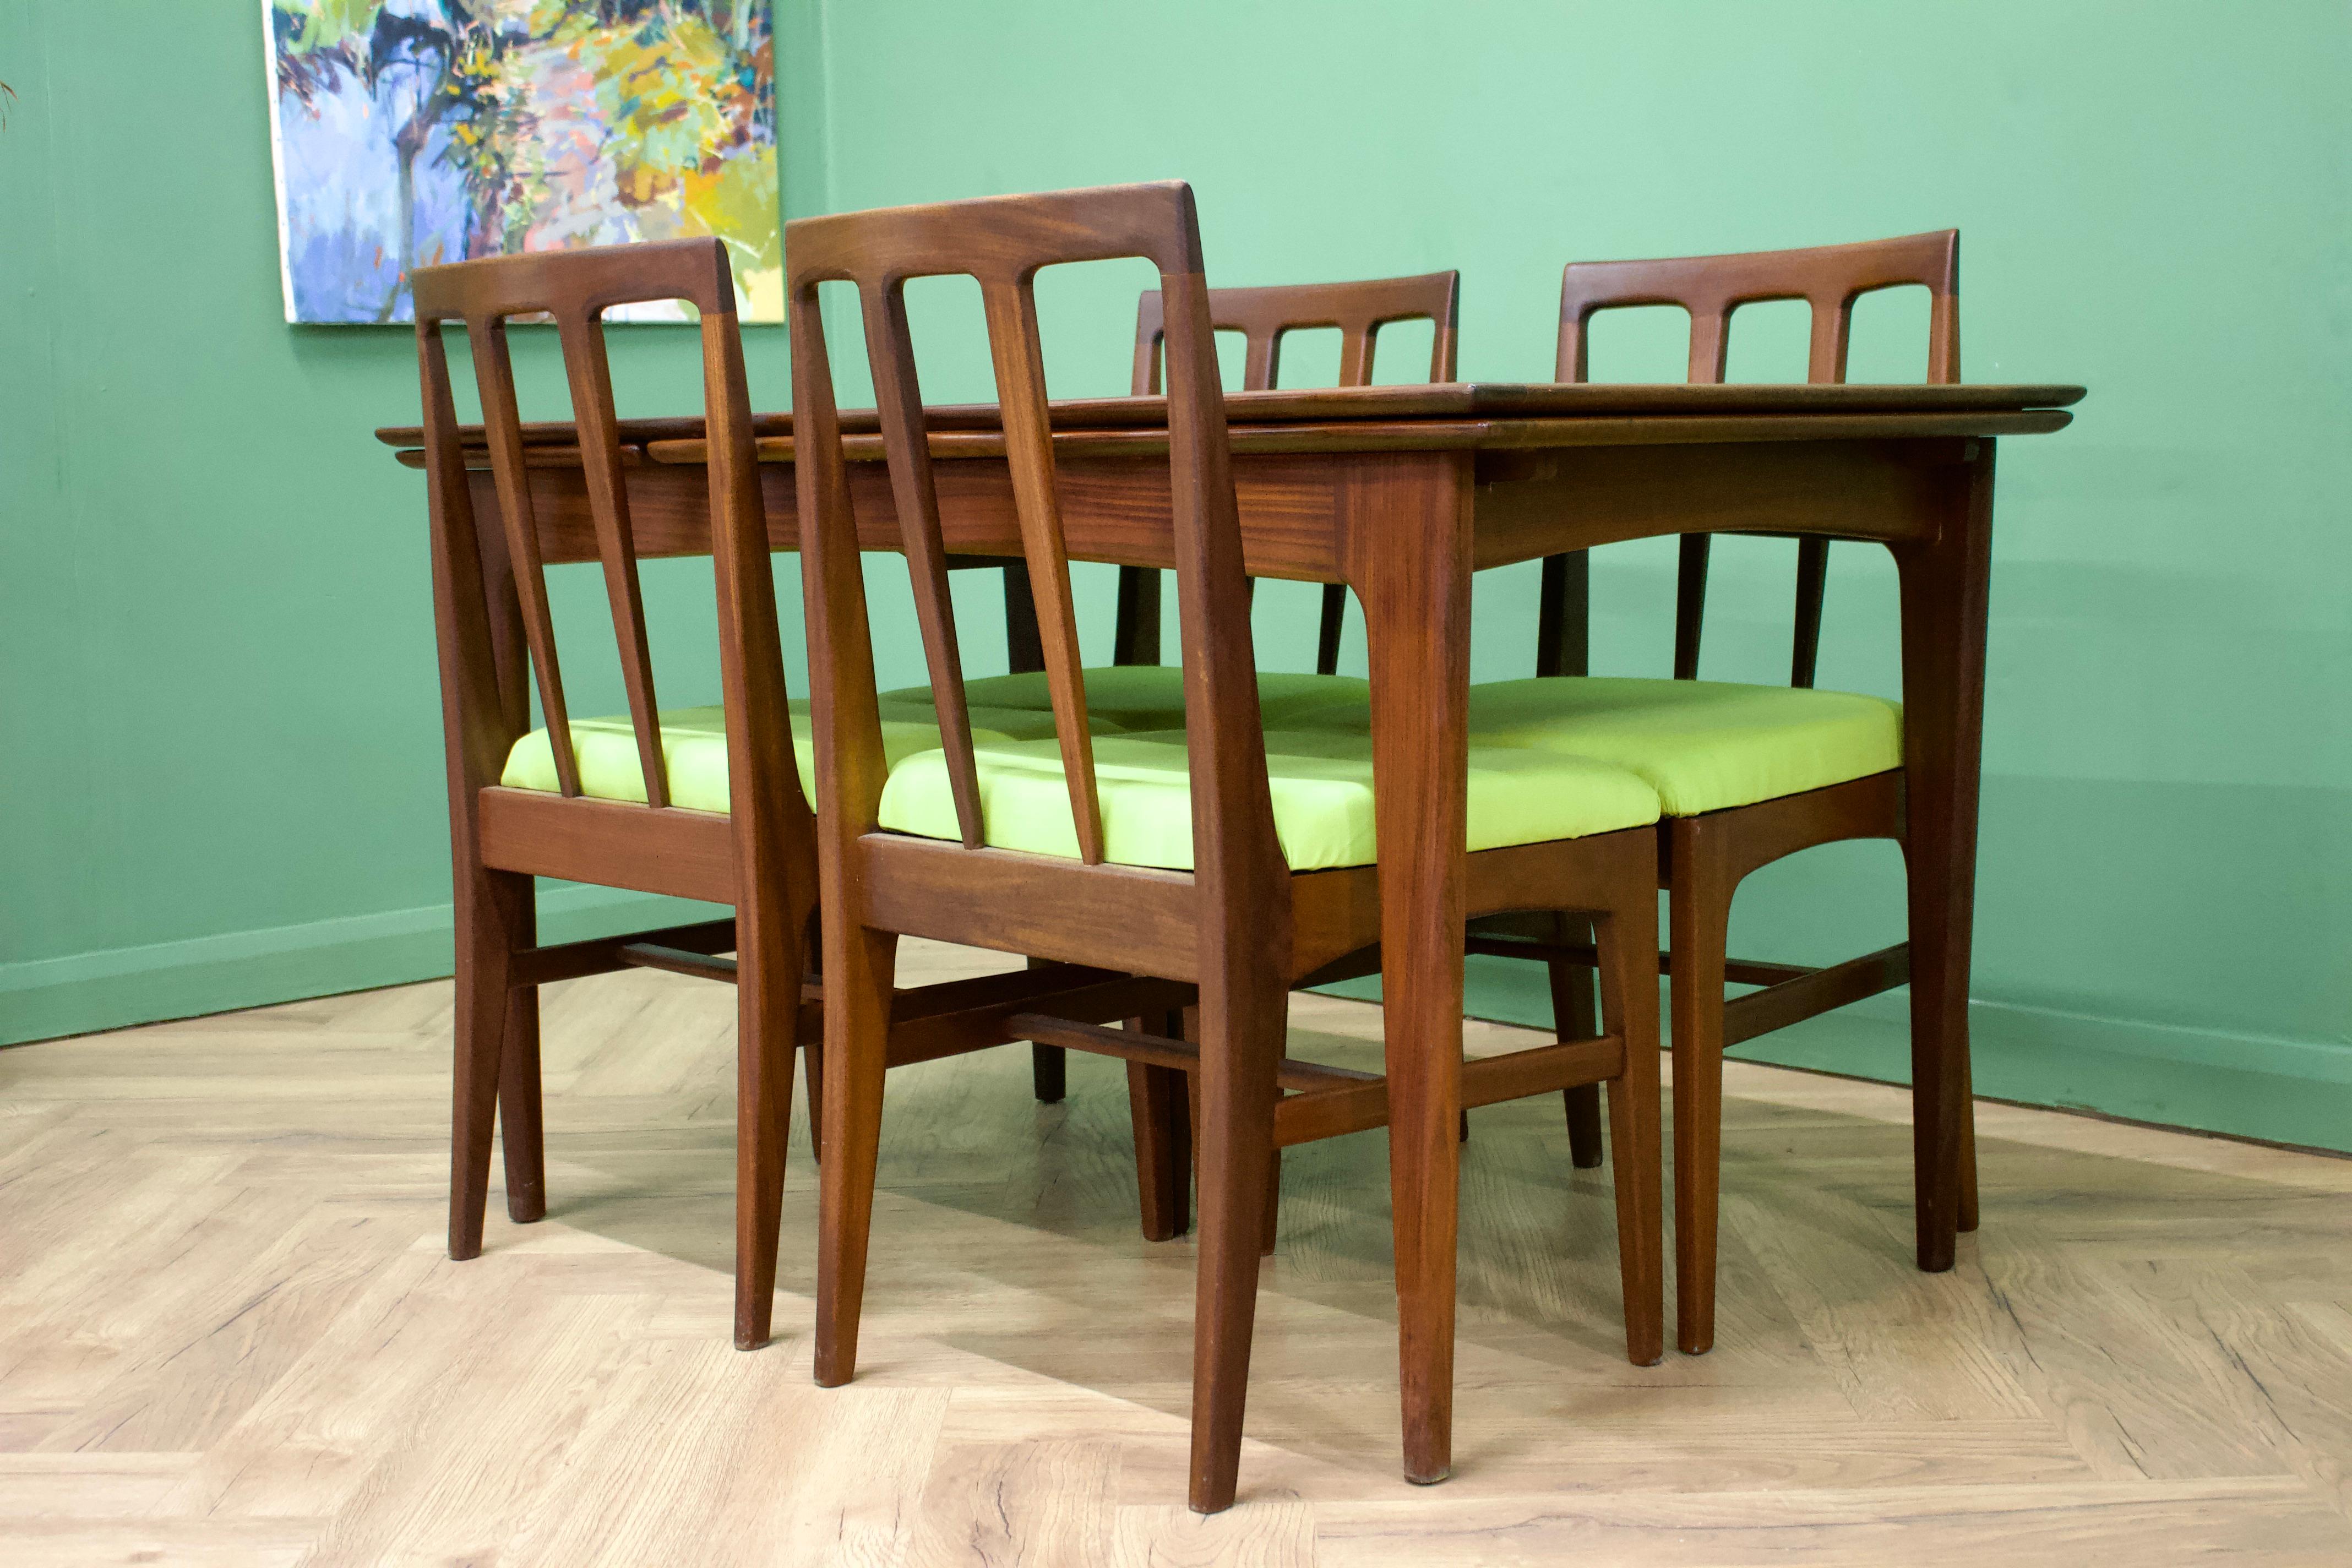 - Mid century extending dining table and 4 dining chairs.
- Made in the UK by Younger.
- Made from teak and teak veneer.
- Extended width 210cm.